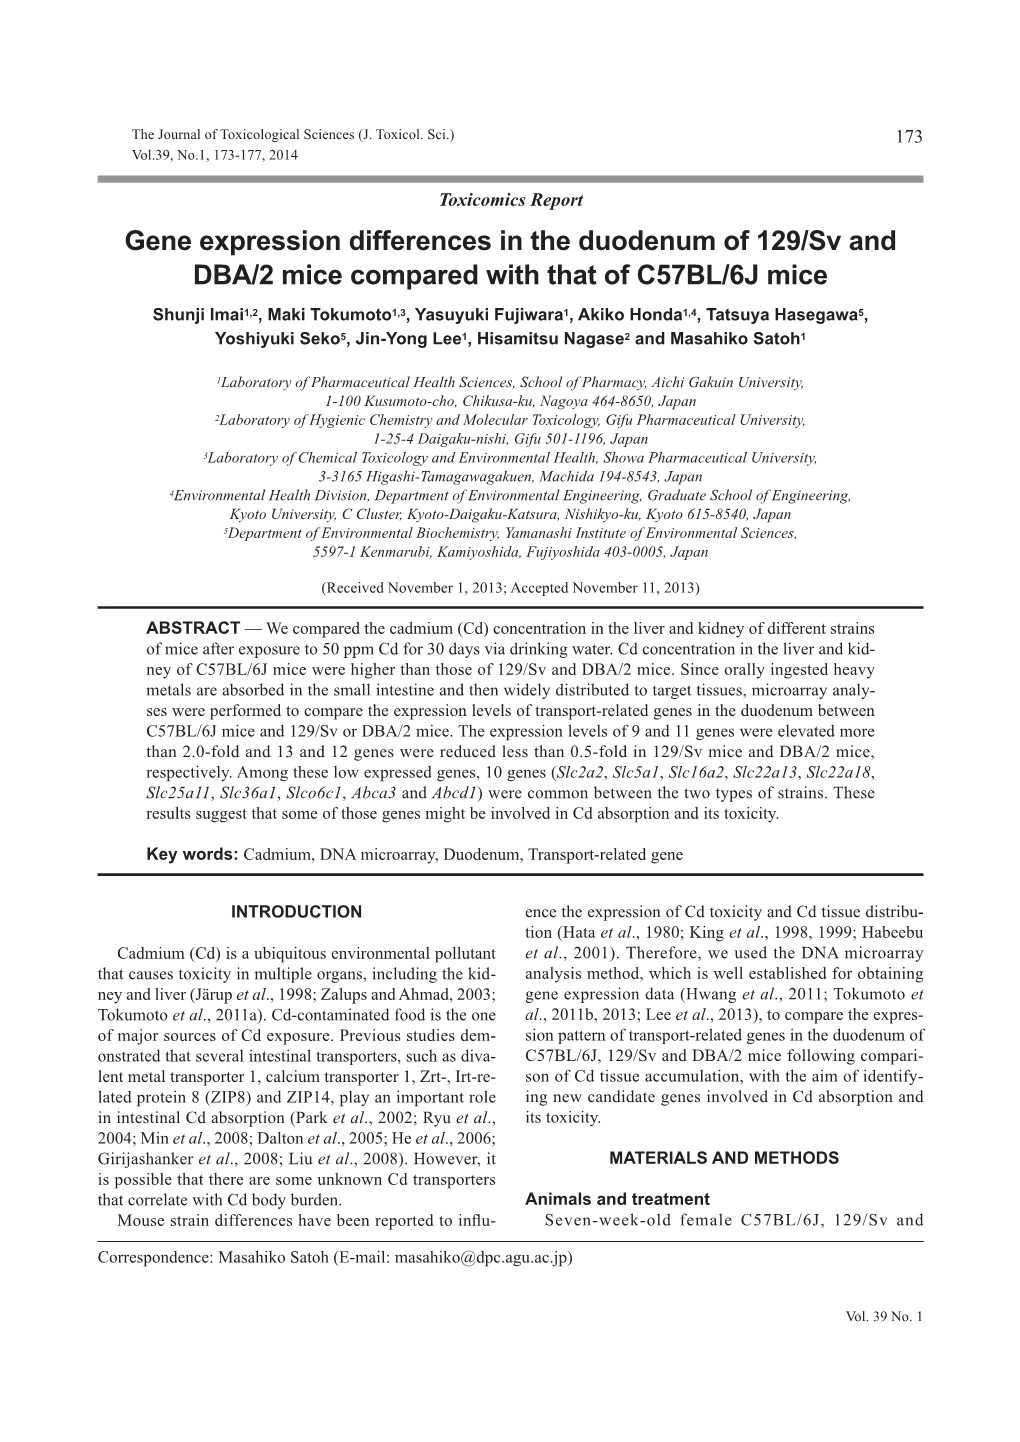 Gene Expression Differences in the Duodenum of 129/Sv and DBA/2 Mice Compared with That of C57BL/6J Mice